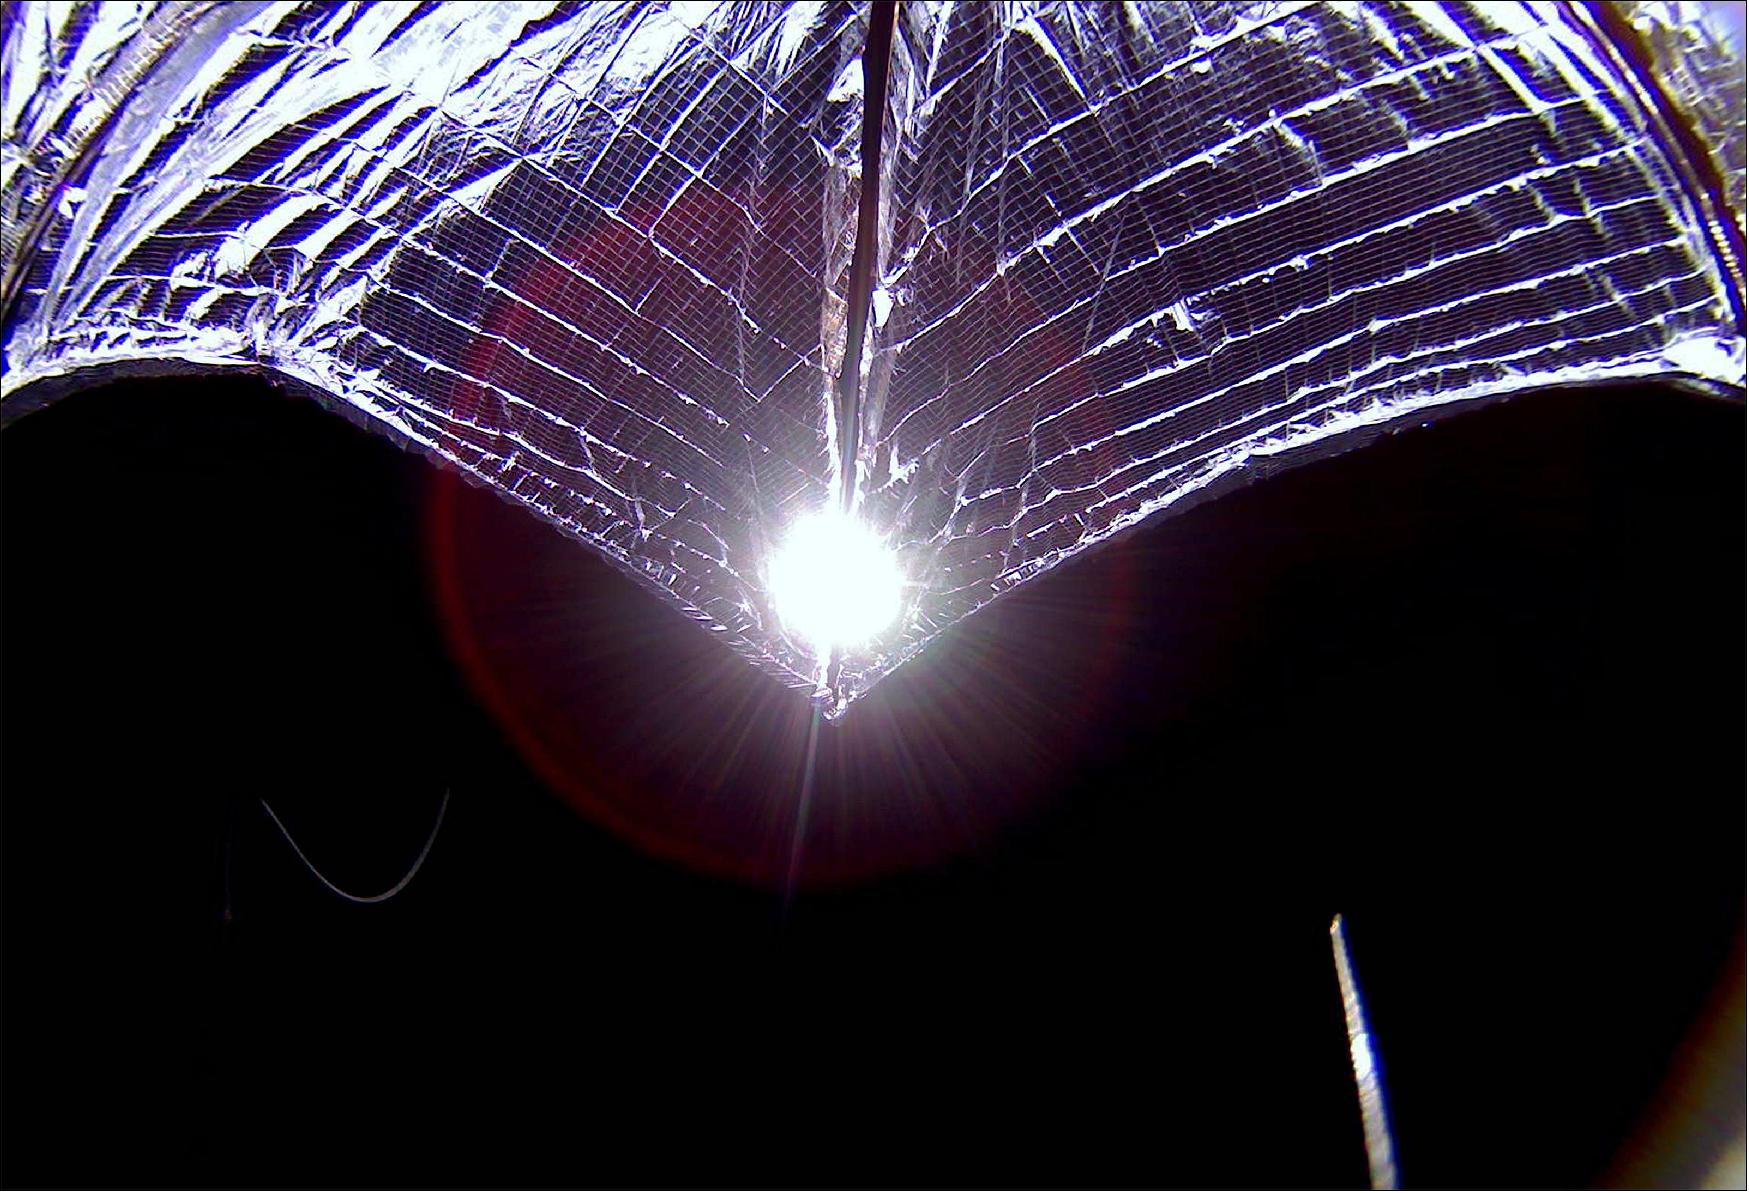 Figure 13: On Monday (29 July), LightSail-2 sent home a new full-resolution image captured by its camera during solar sail deployment. The perspective is opposite to last week’s full-resolution image and shows the sail more fully deployed. LightSail-2's aluminized Mylar sail shines against the blackness of space, with the Sun peeking through near a sail boom (image credit: The Planetary Society)